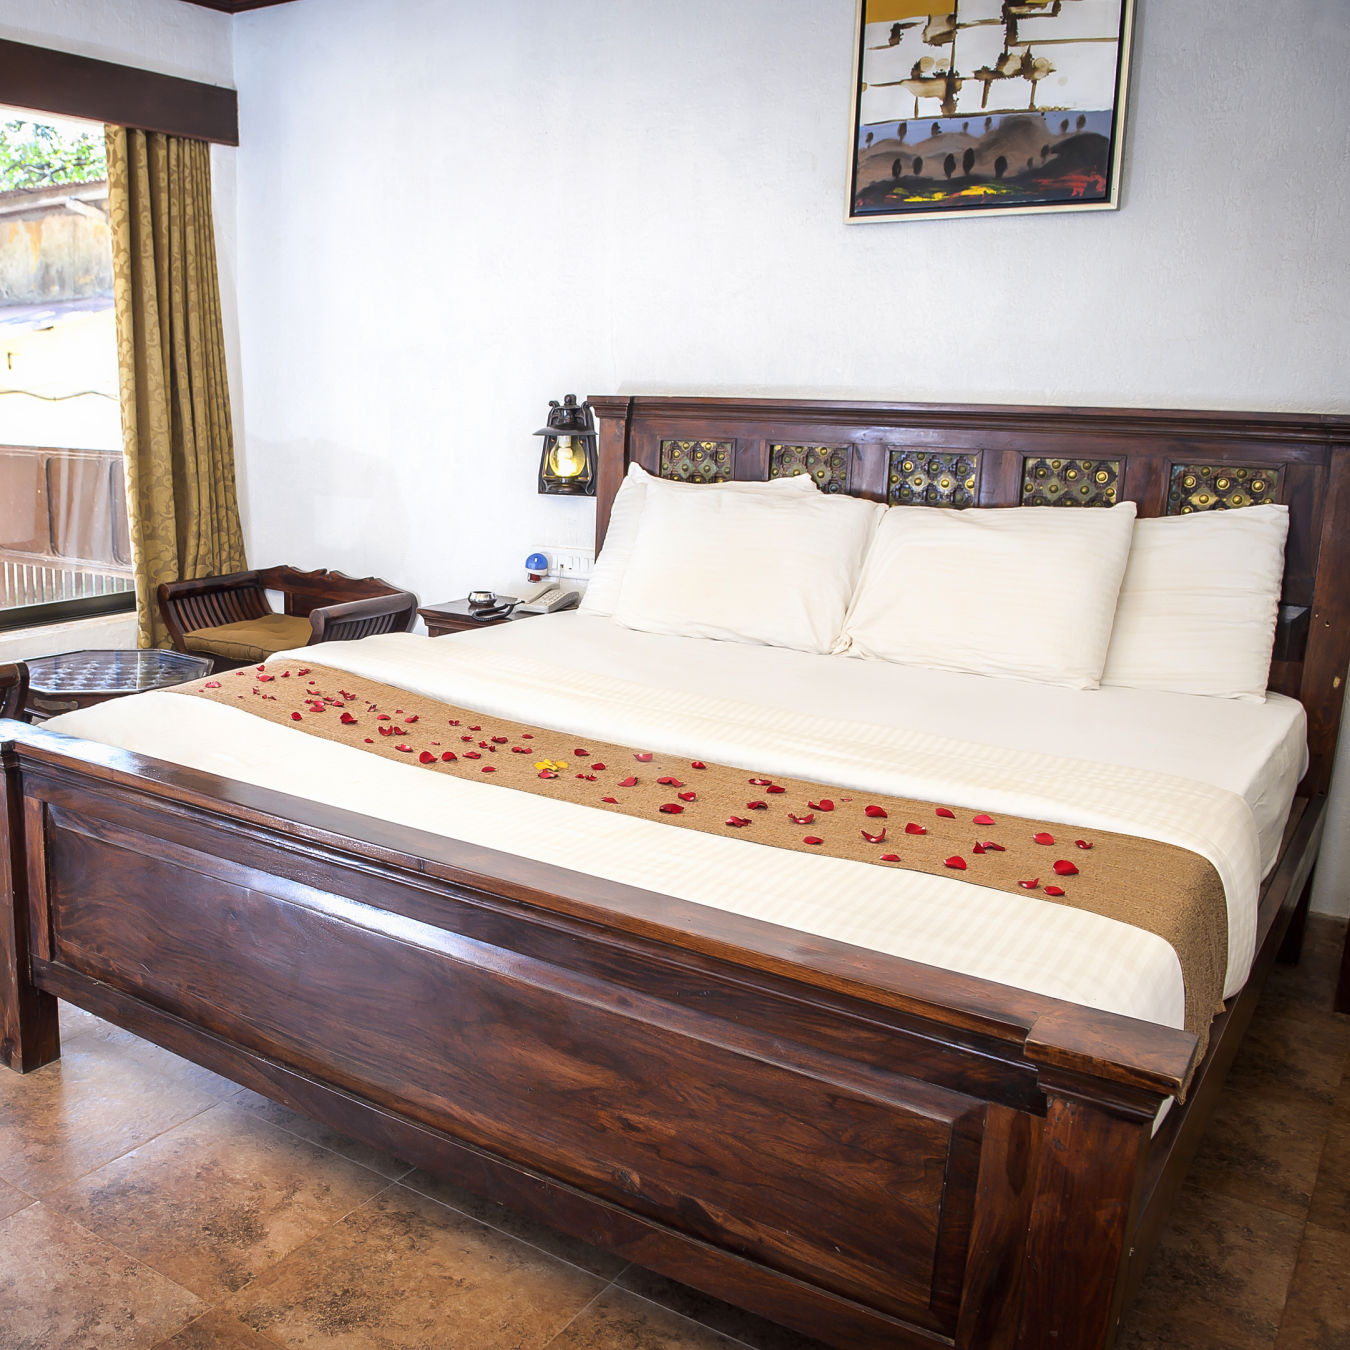 Adamo The Village - the balcony beside the king size bed offered at the Super Deluxe rooms in Matheran